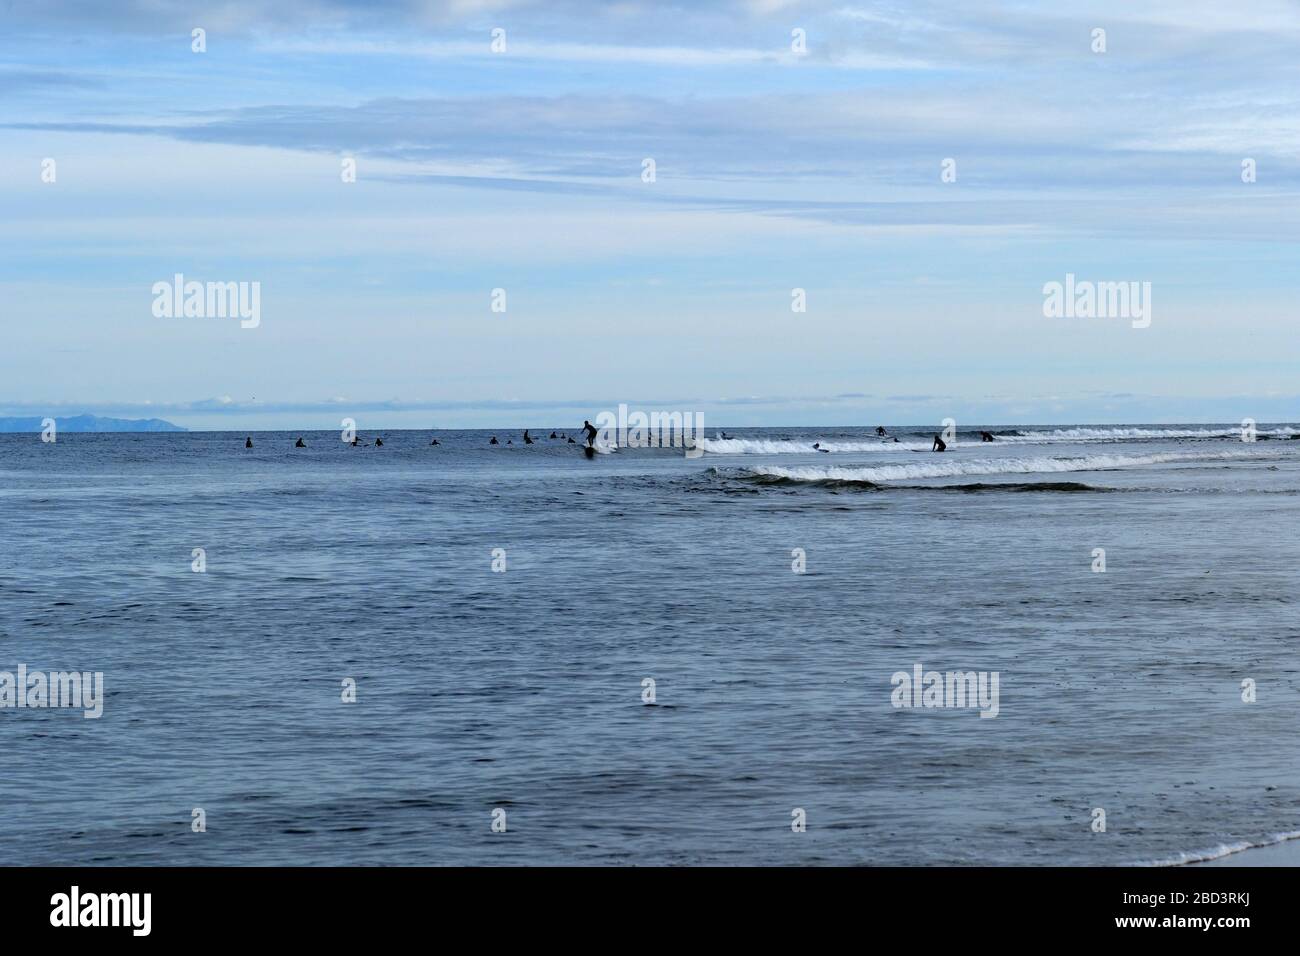 Surfers wait for a good wave out in the ocean at Surfrider Beach in Malibu California Stock Photo